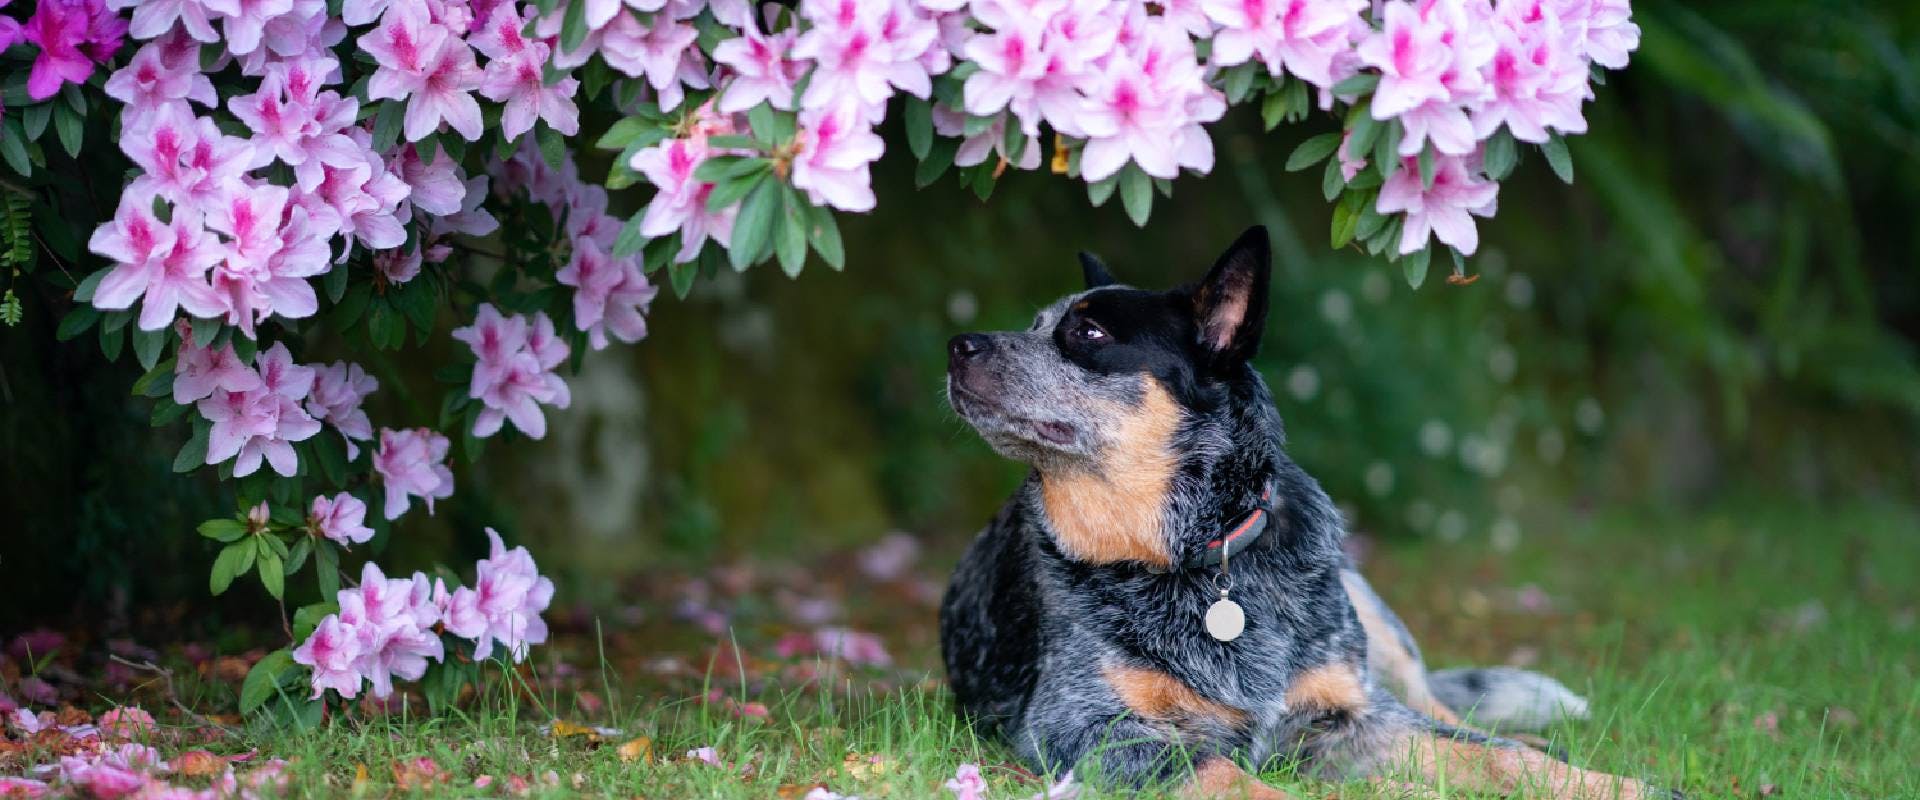 are azaleas toxic to cats and dogs